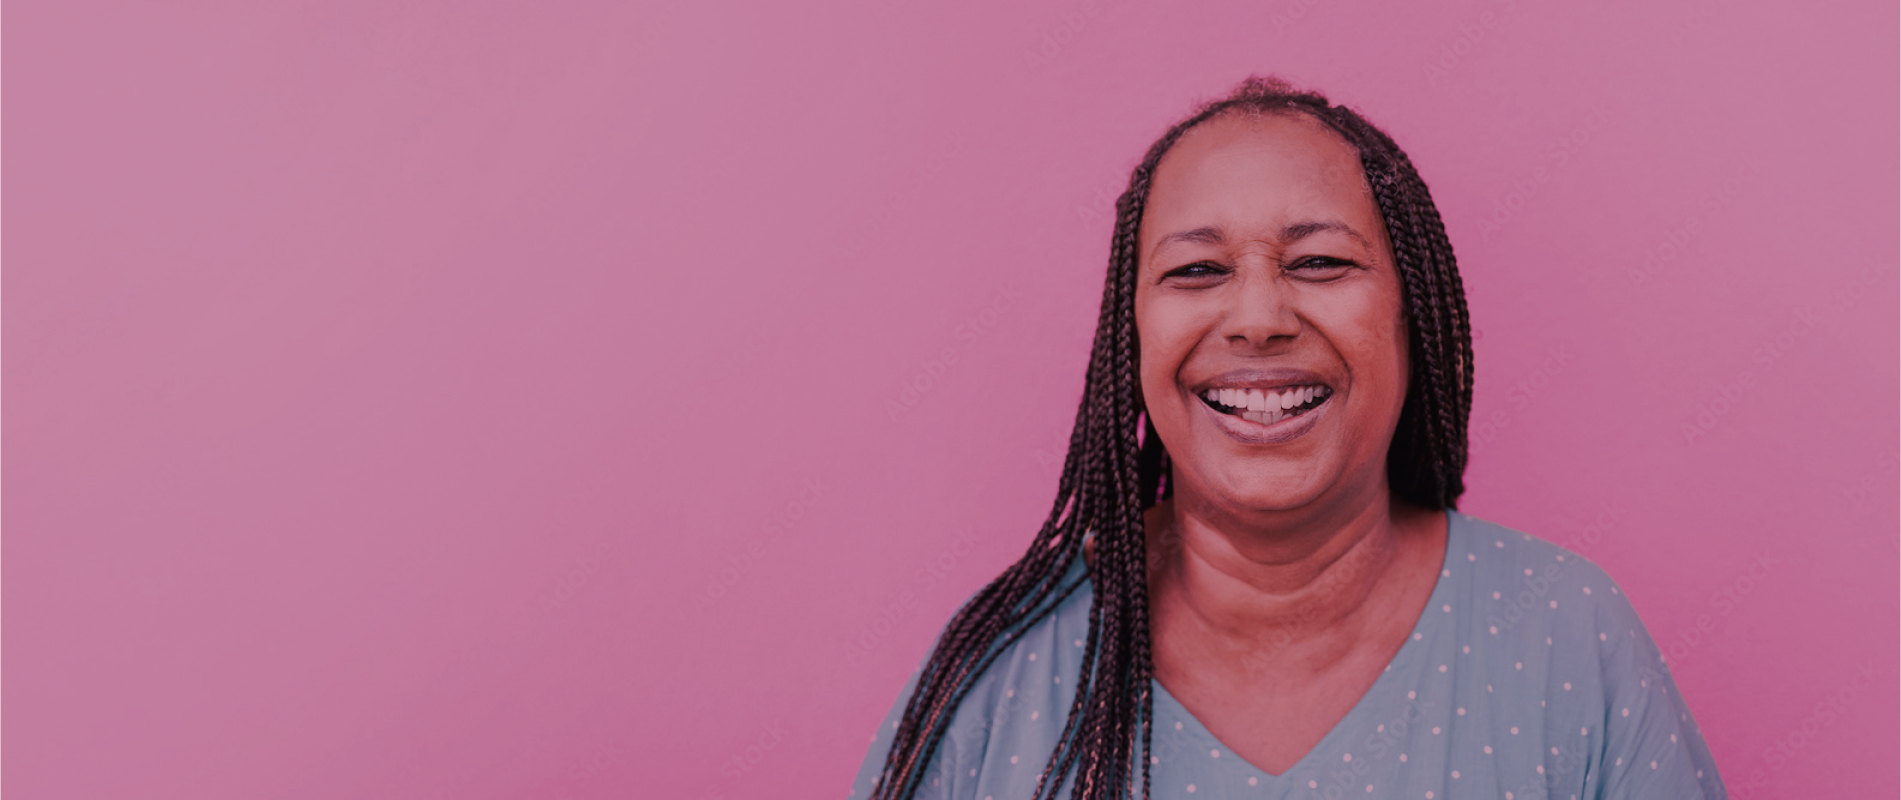 Black woman smiling on pink background